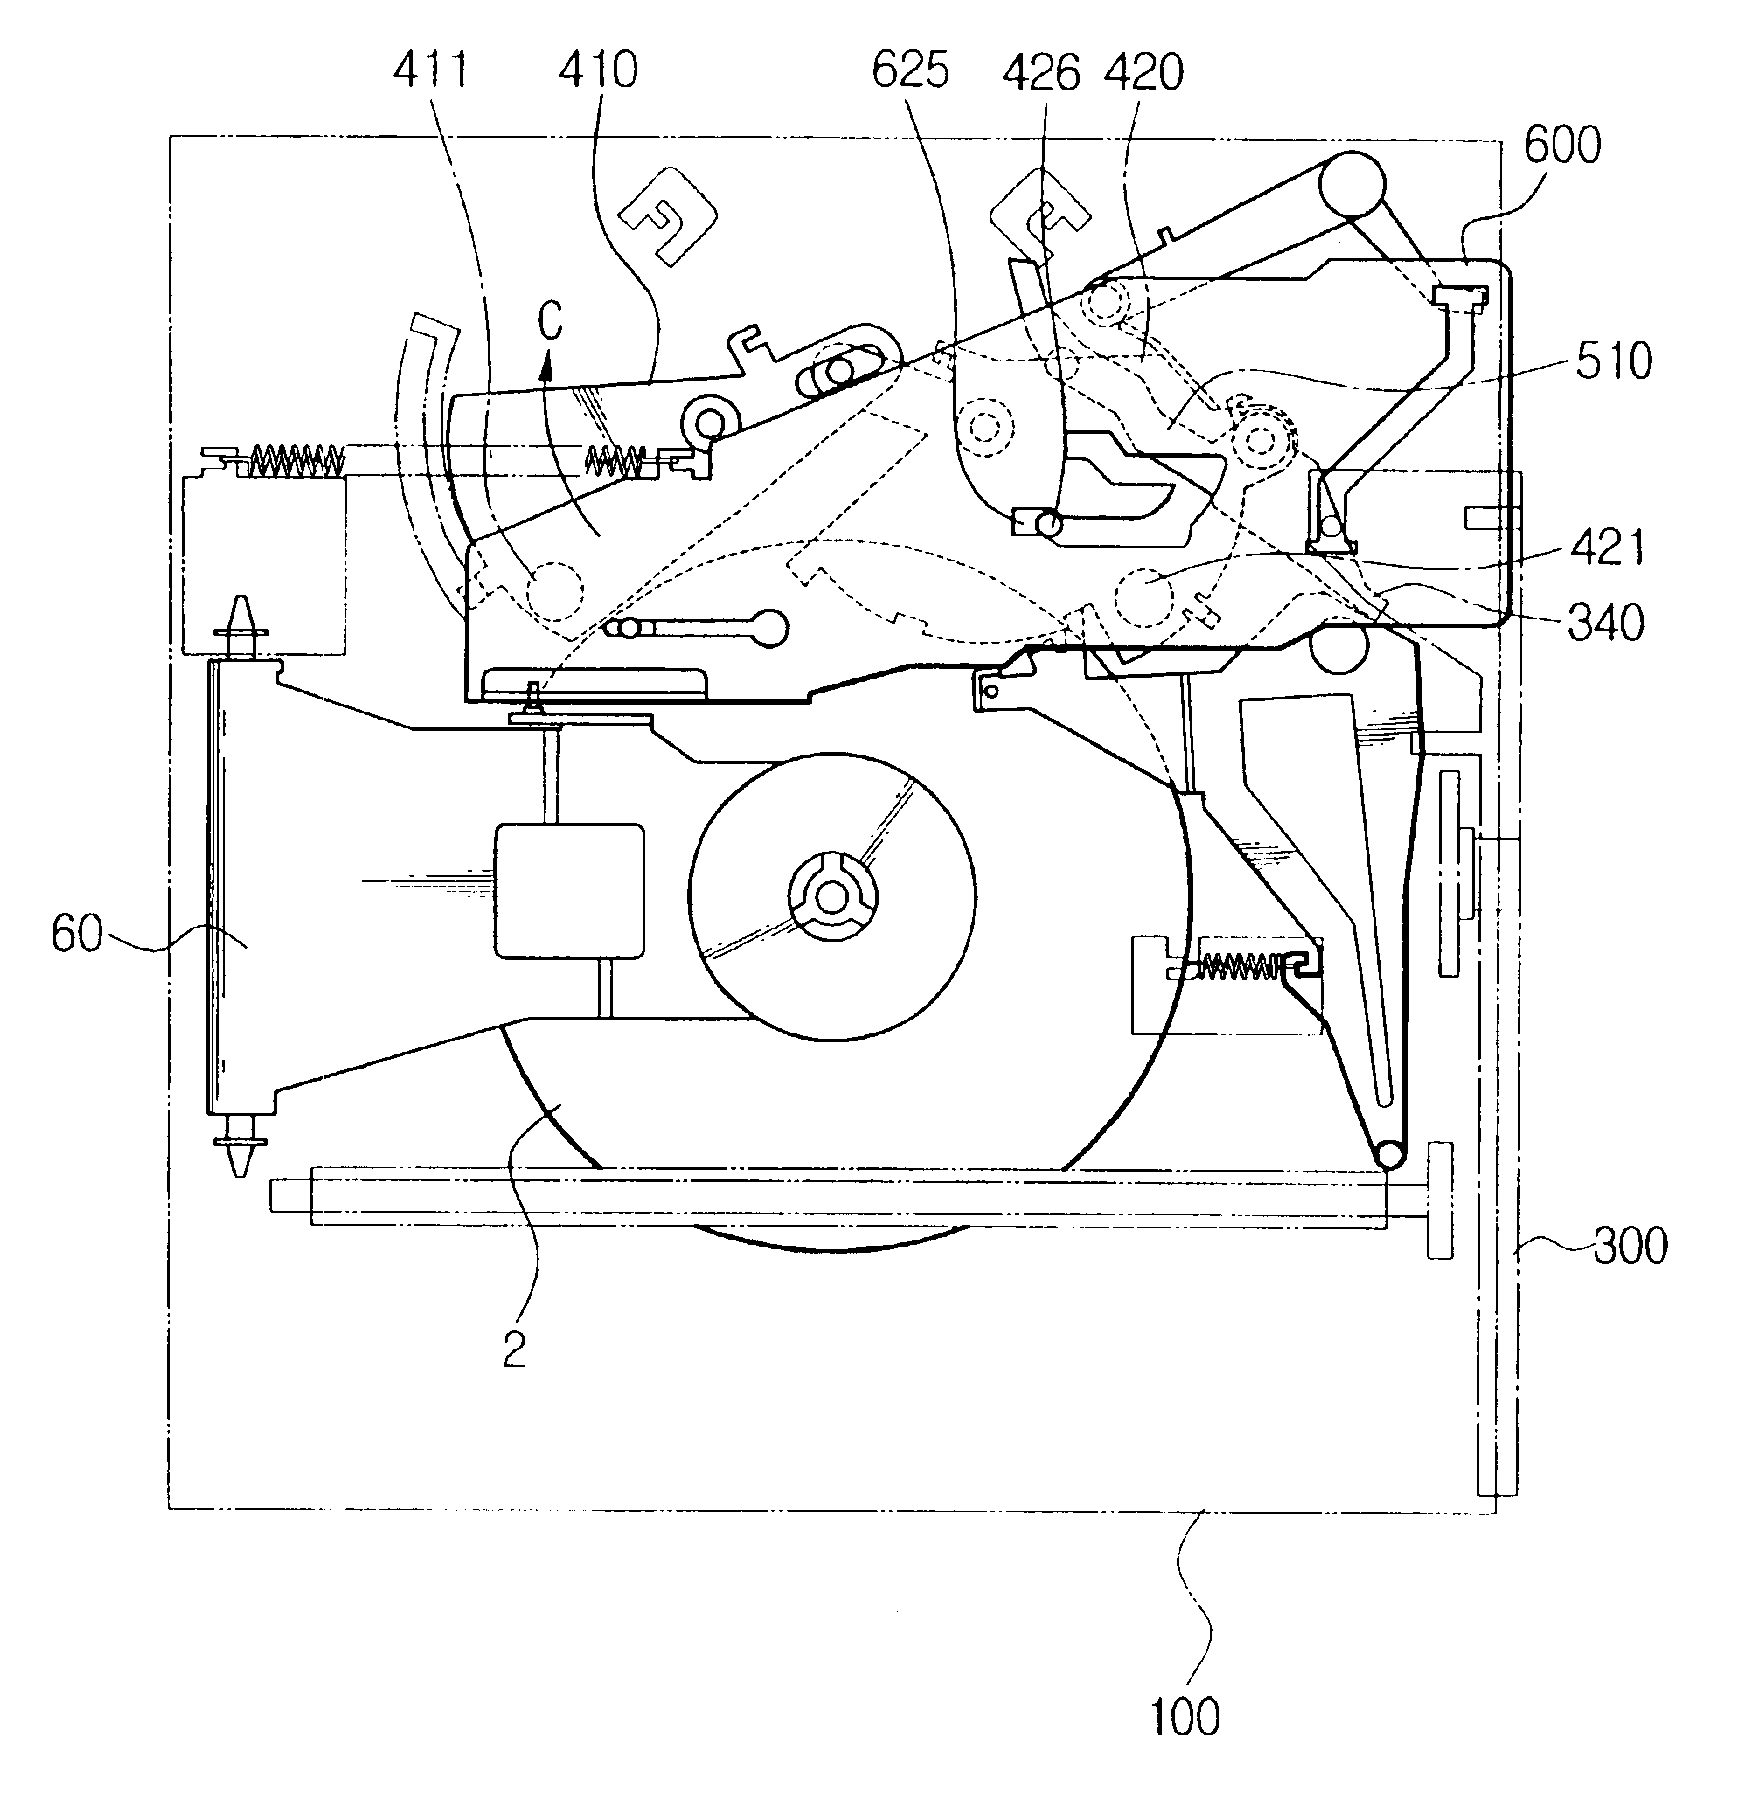 Disk loading device for disk player and a method for using the same